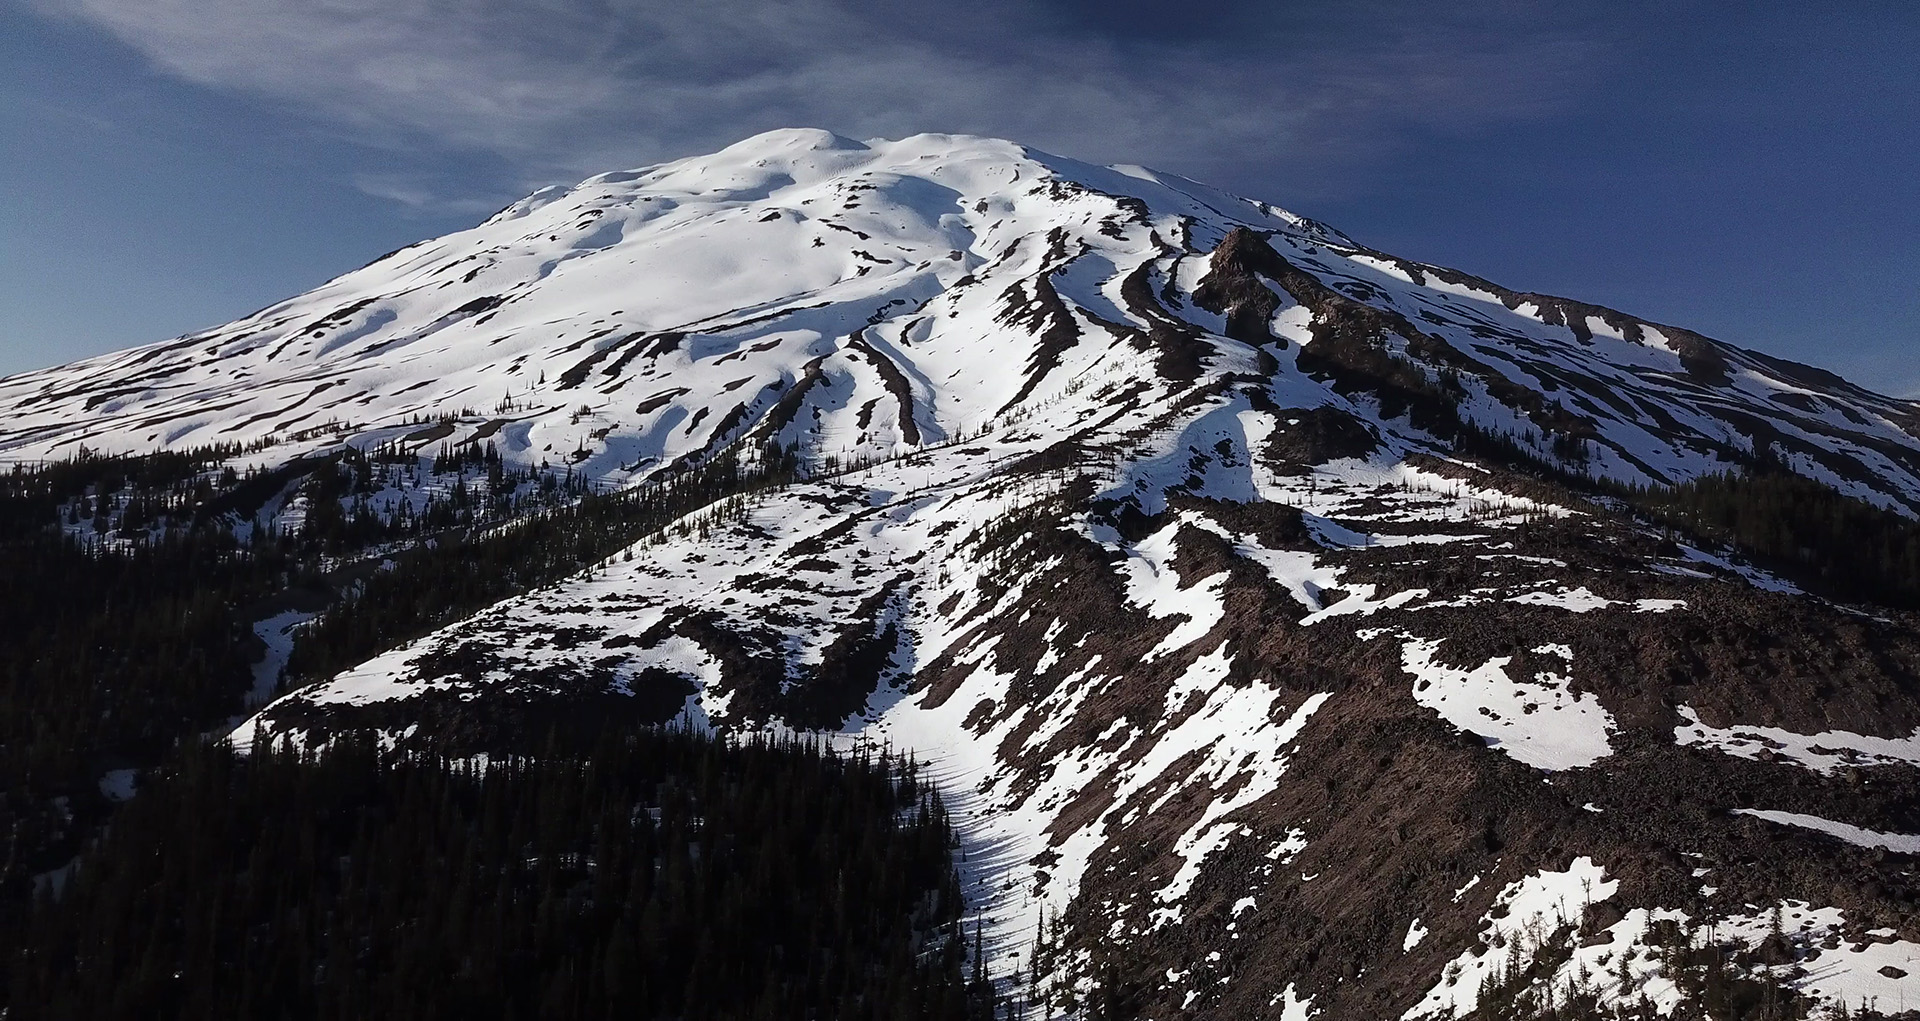 A Beginners Guide to Climbing Mt. St. Helens